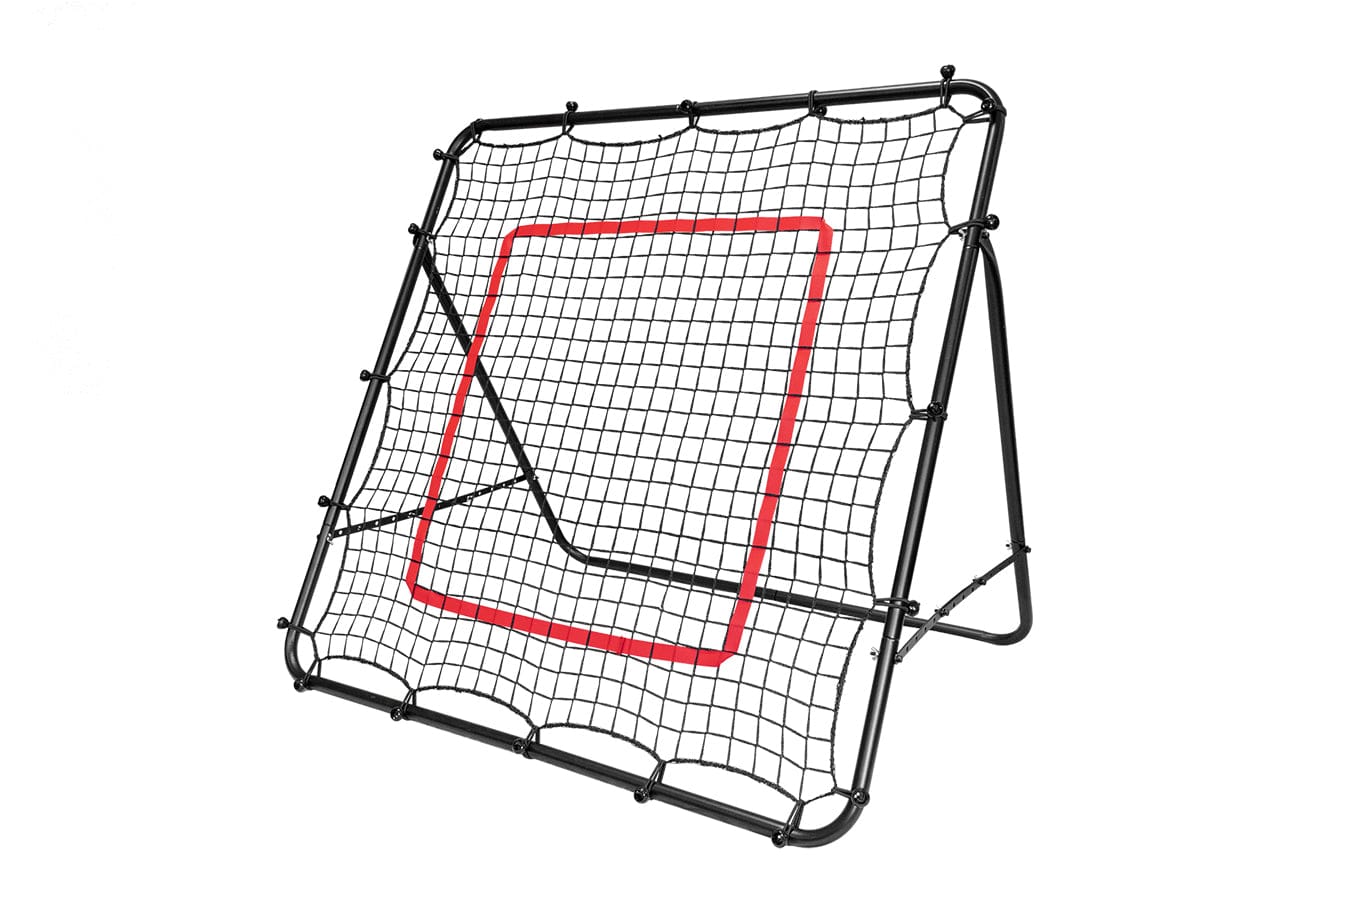 Replacement Net For CFR-1 Rebounder (16A4201) Signature Lacrosse